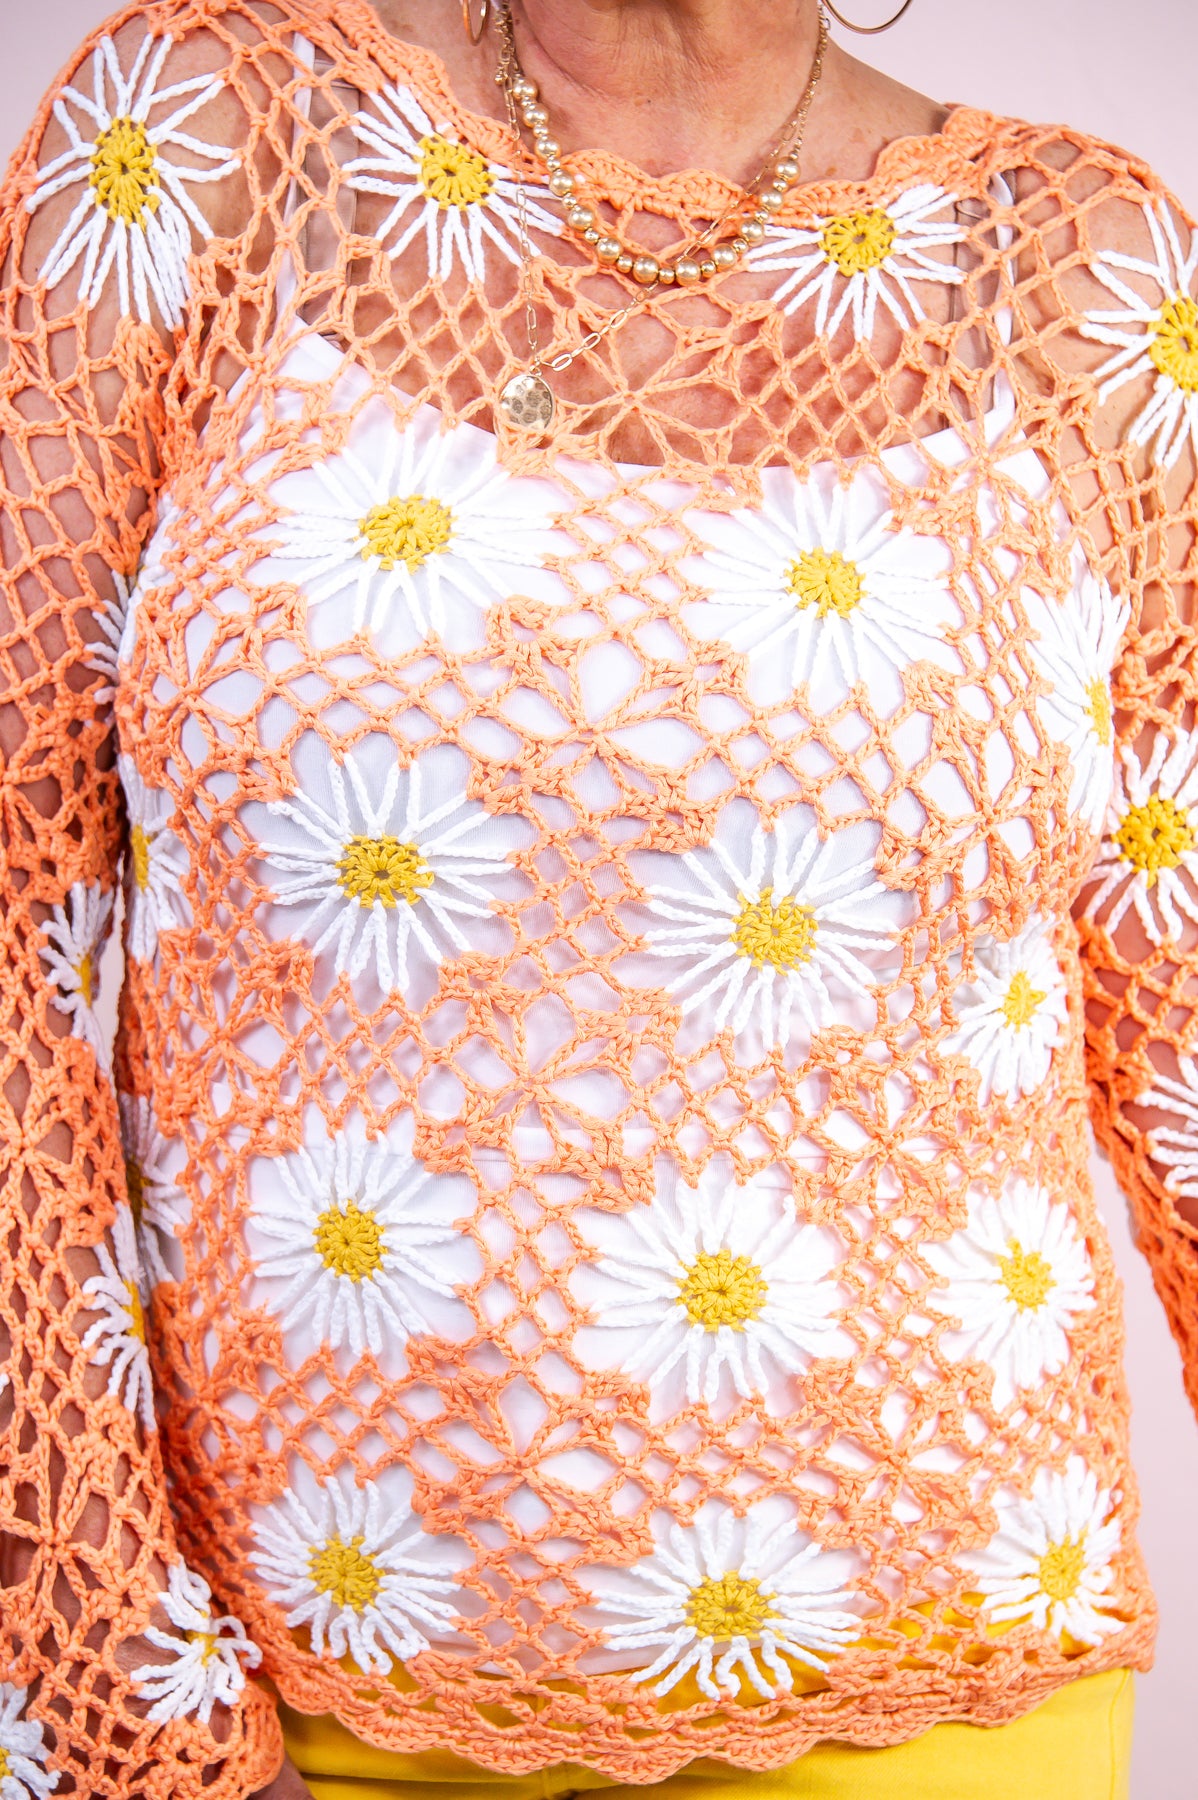 Soaking Up The Sun Apricot/Multi Color Floral Knitted Mesh Top - T9104AP